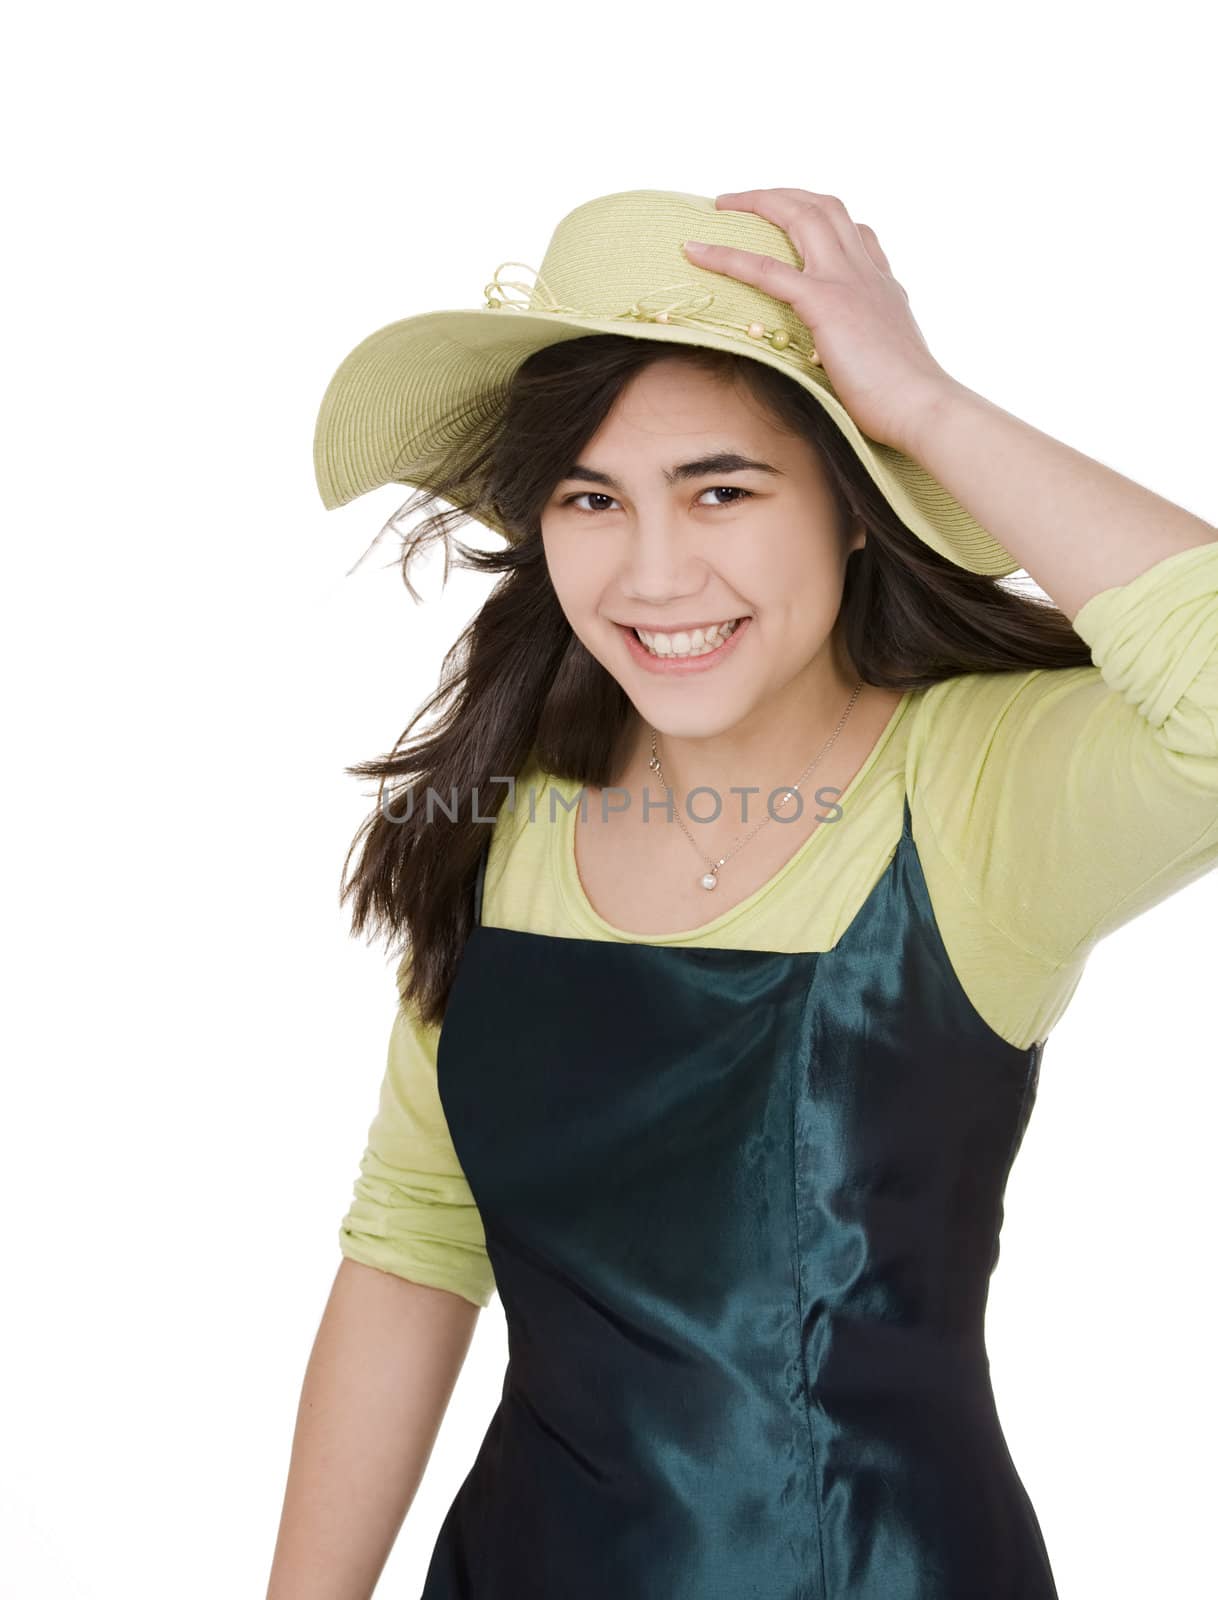 Smiling teen girl in green dress and lime green hat, by jarenwicklund